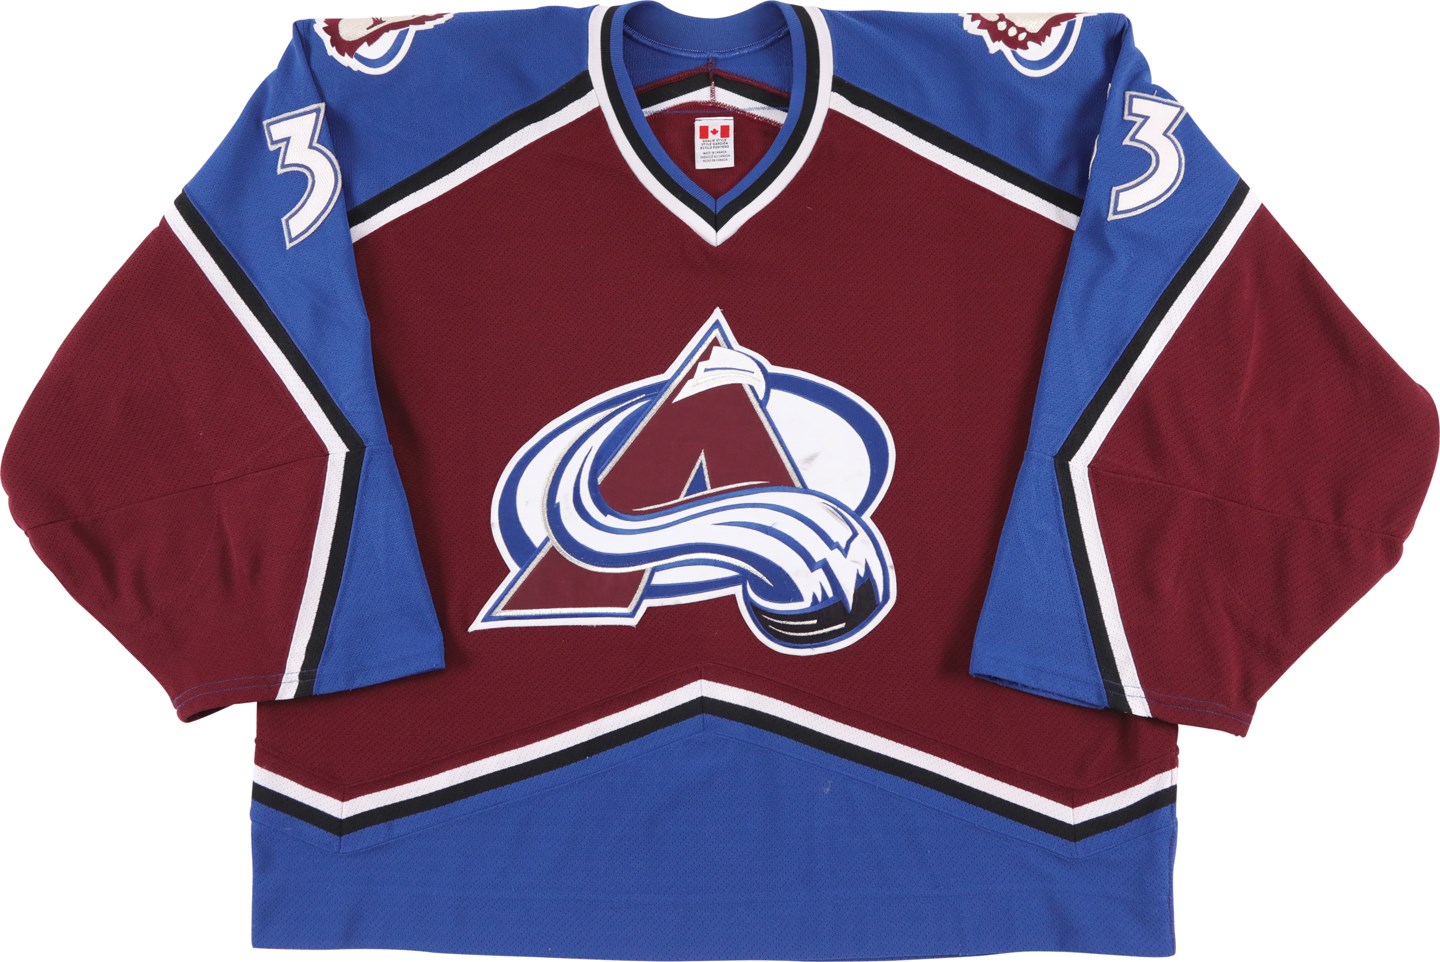 Hockey - 10/31/02 Patrick Roy Colorado Avalanche Game Worn Jersey (MeiGray & Photo-Matched)